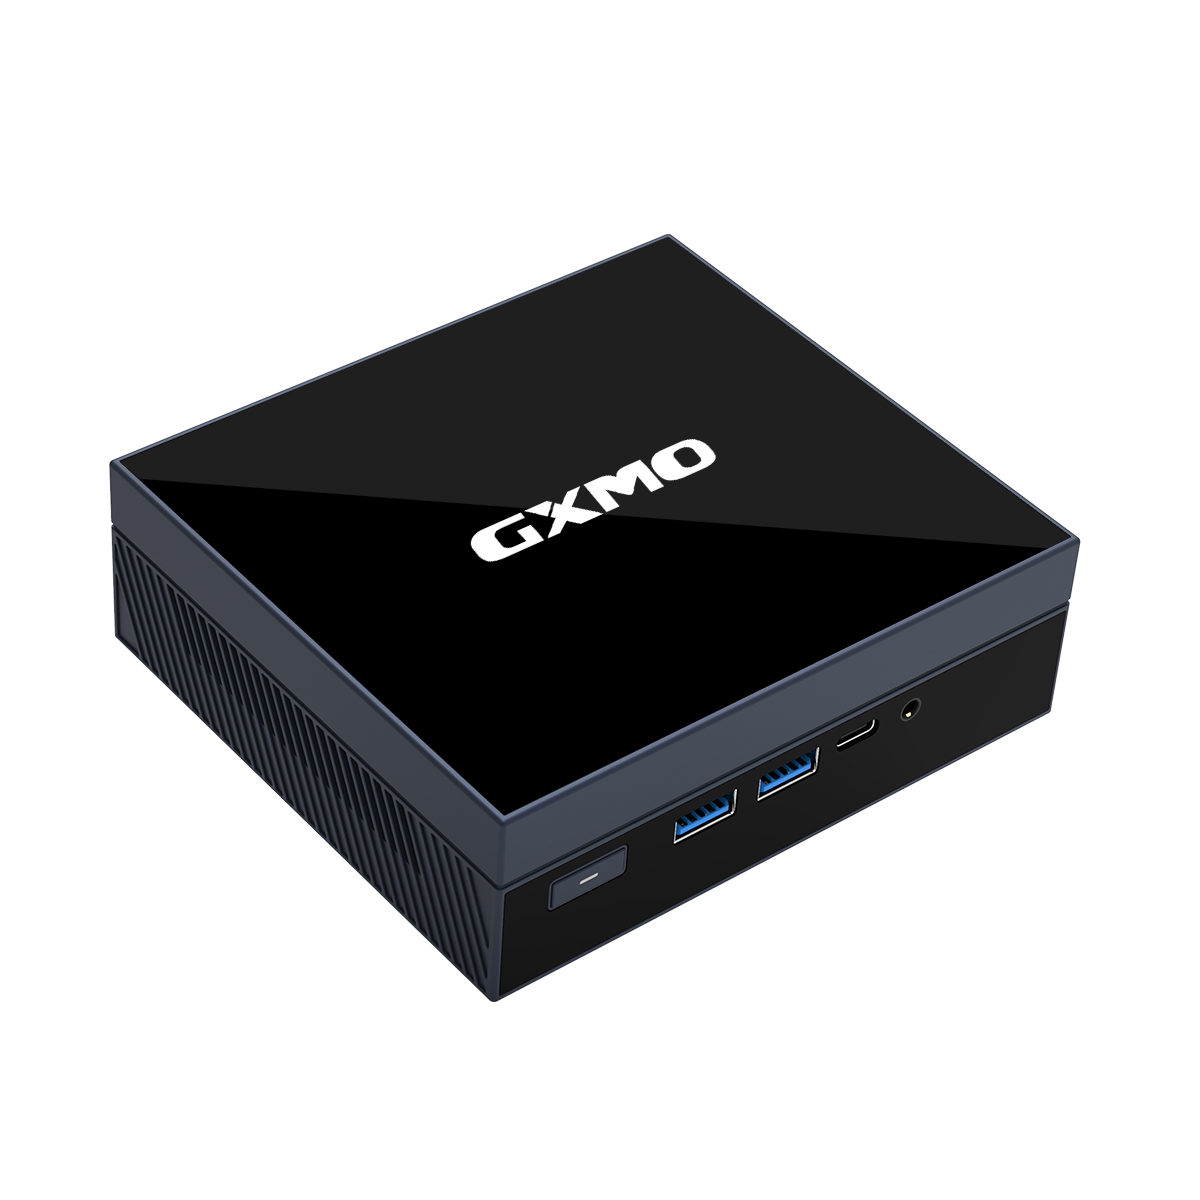 Find GXMO GX55 Intel 11th Jasper Laker N5105 Mini PC 8GB DDR4-2933 RAM 256GB NVMe SSD Quad Core 2.0GHz to 2.9GHz WiFi5 BT4.2 1000M LAN HDMI Type-C Trible Screen 4K HD 60 FPS Windows10 Mini Computer for Sale on Gipsybee.com with cryptocurrencies